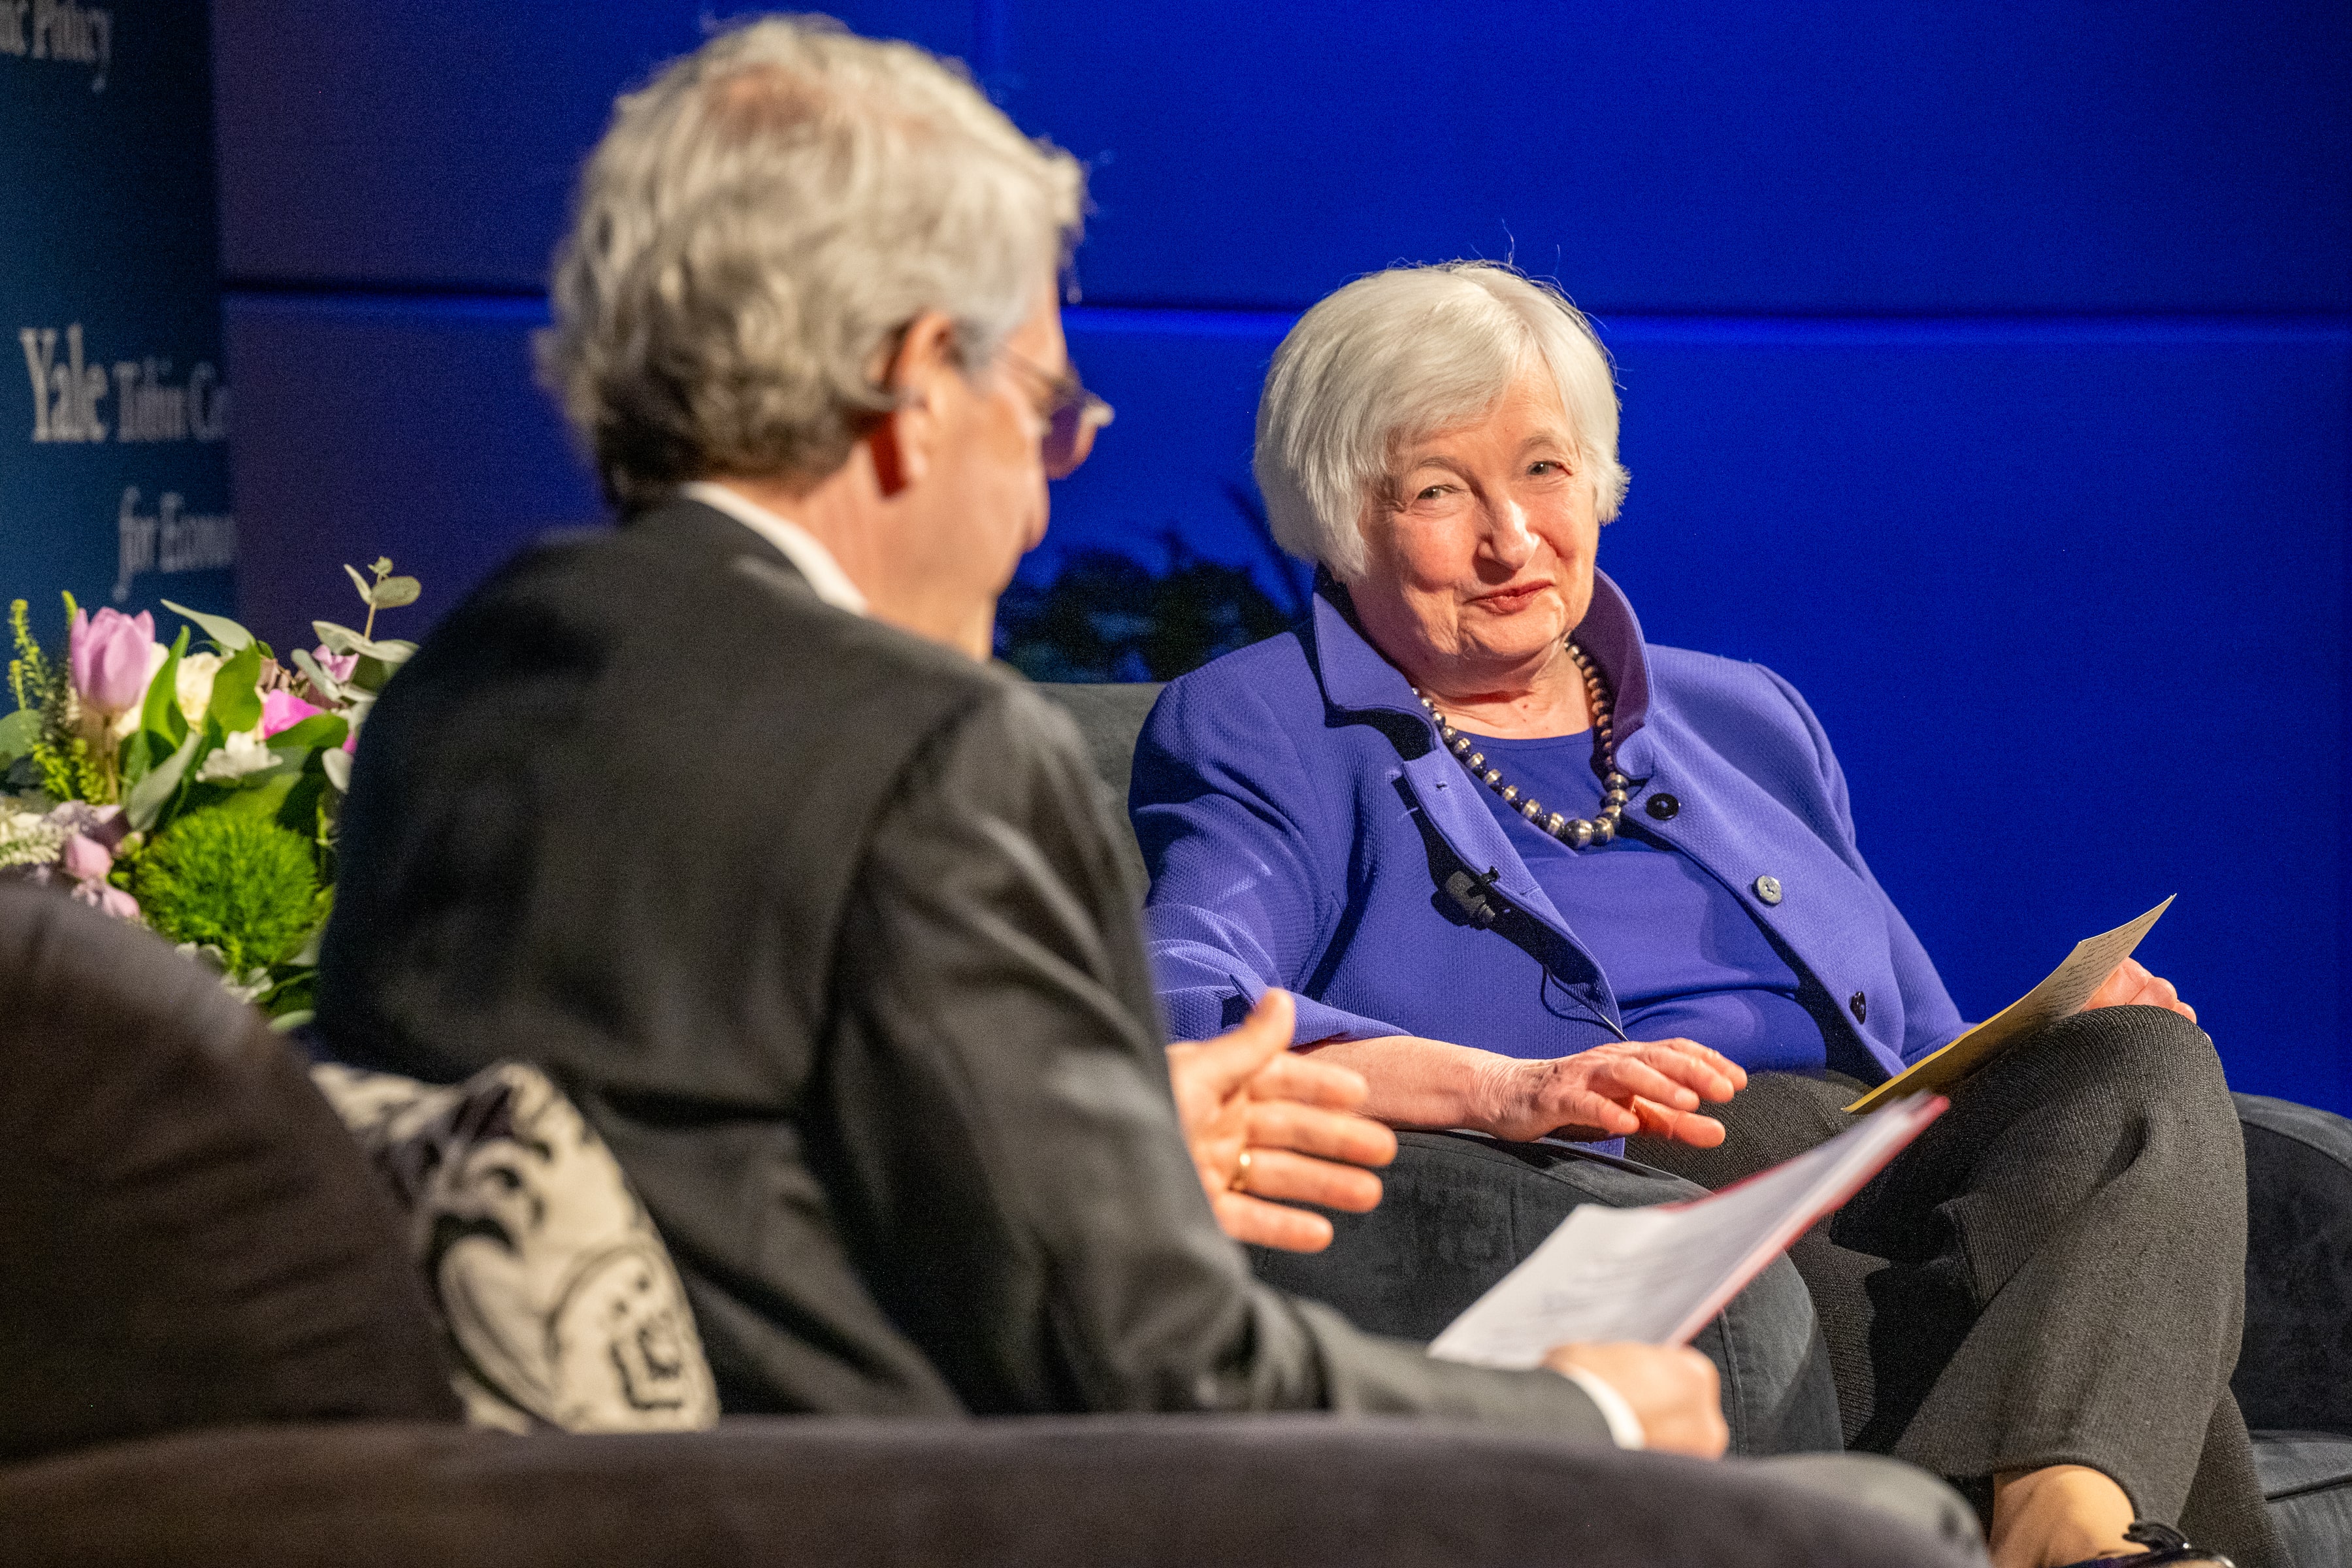 Treasury Secretary Janet Yellen during a Fireside Chat with Yale President Peter Salovey